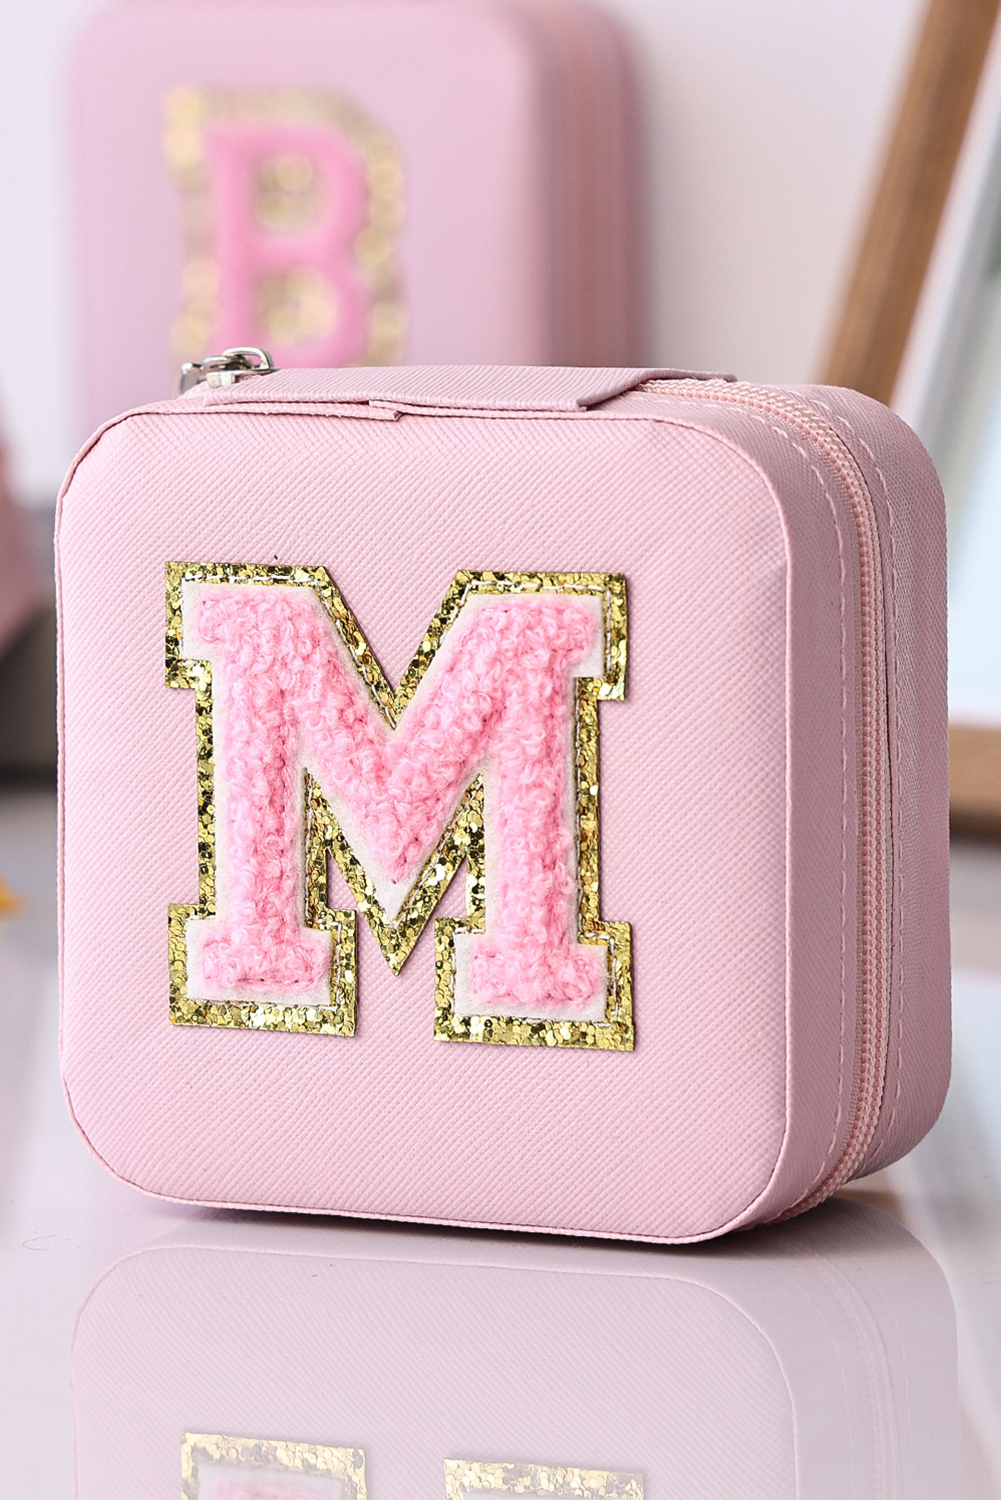 Shewin Wholesale Distributor Pink Initial M Chenille Square JEWELRY Box